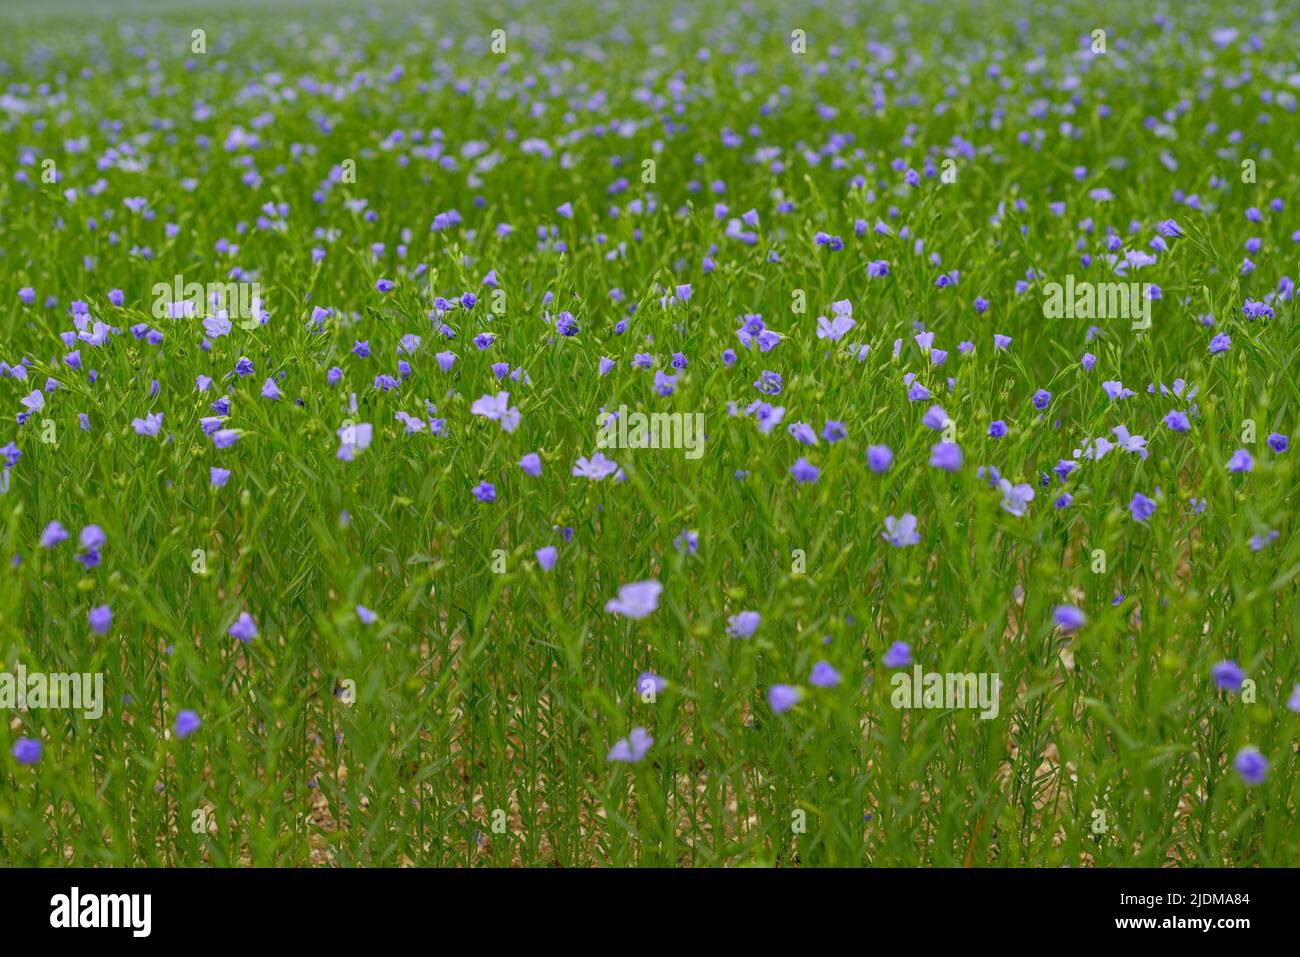 Green field of blue flax flowers Stock Photo